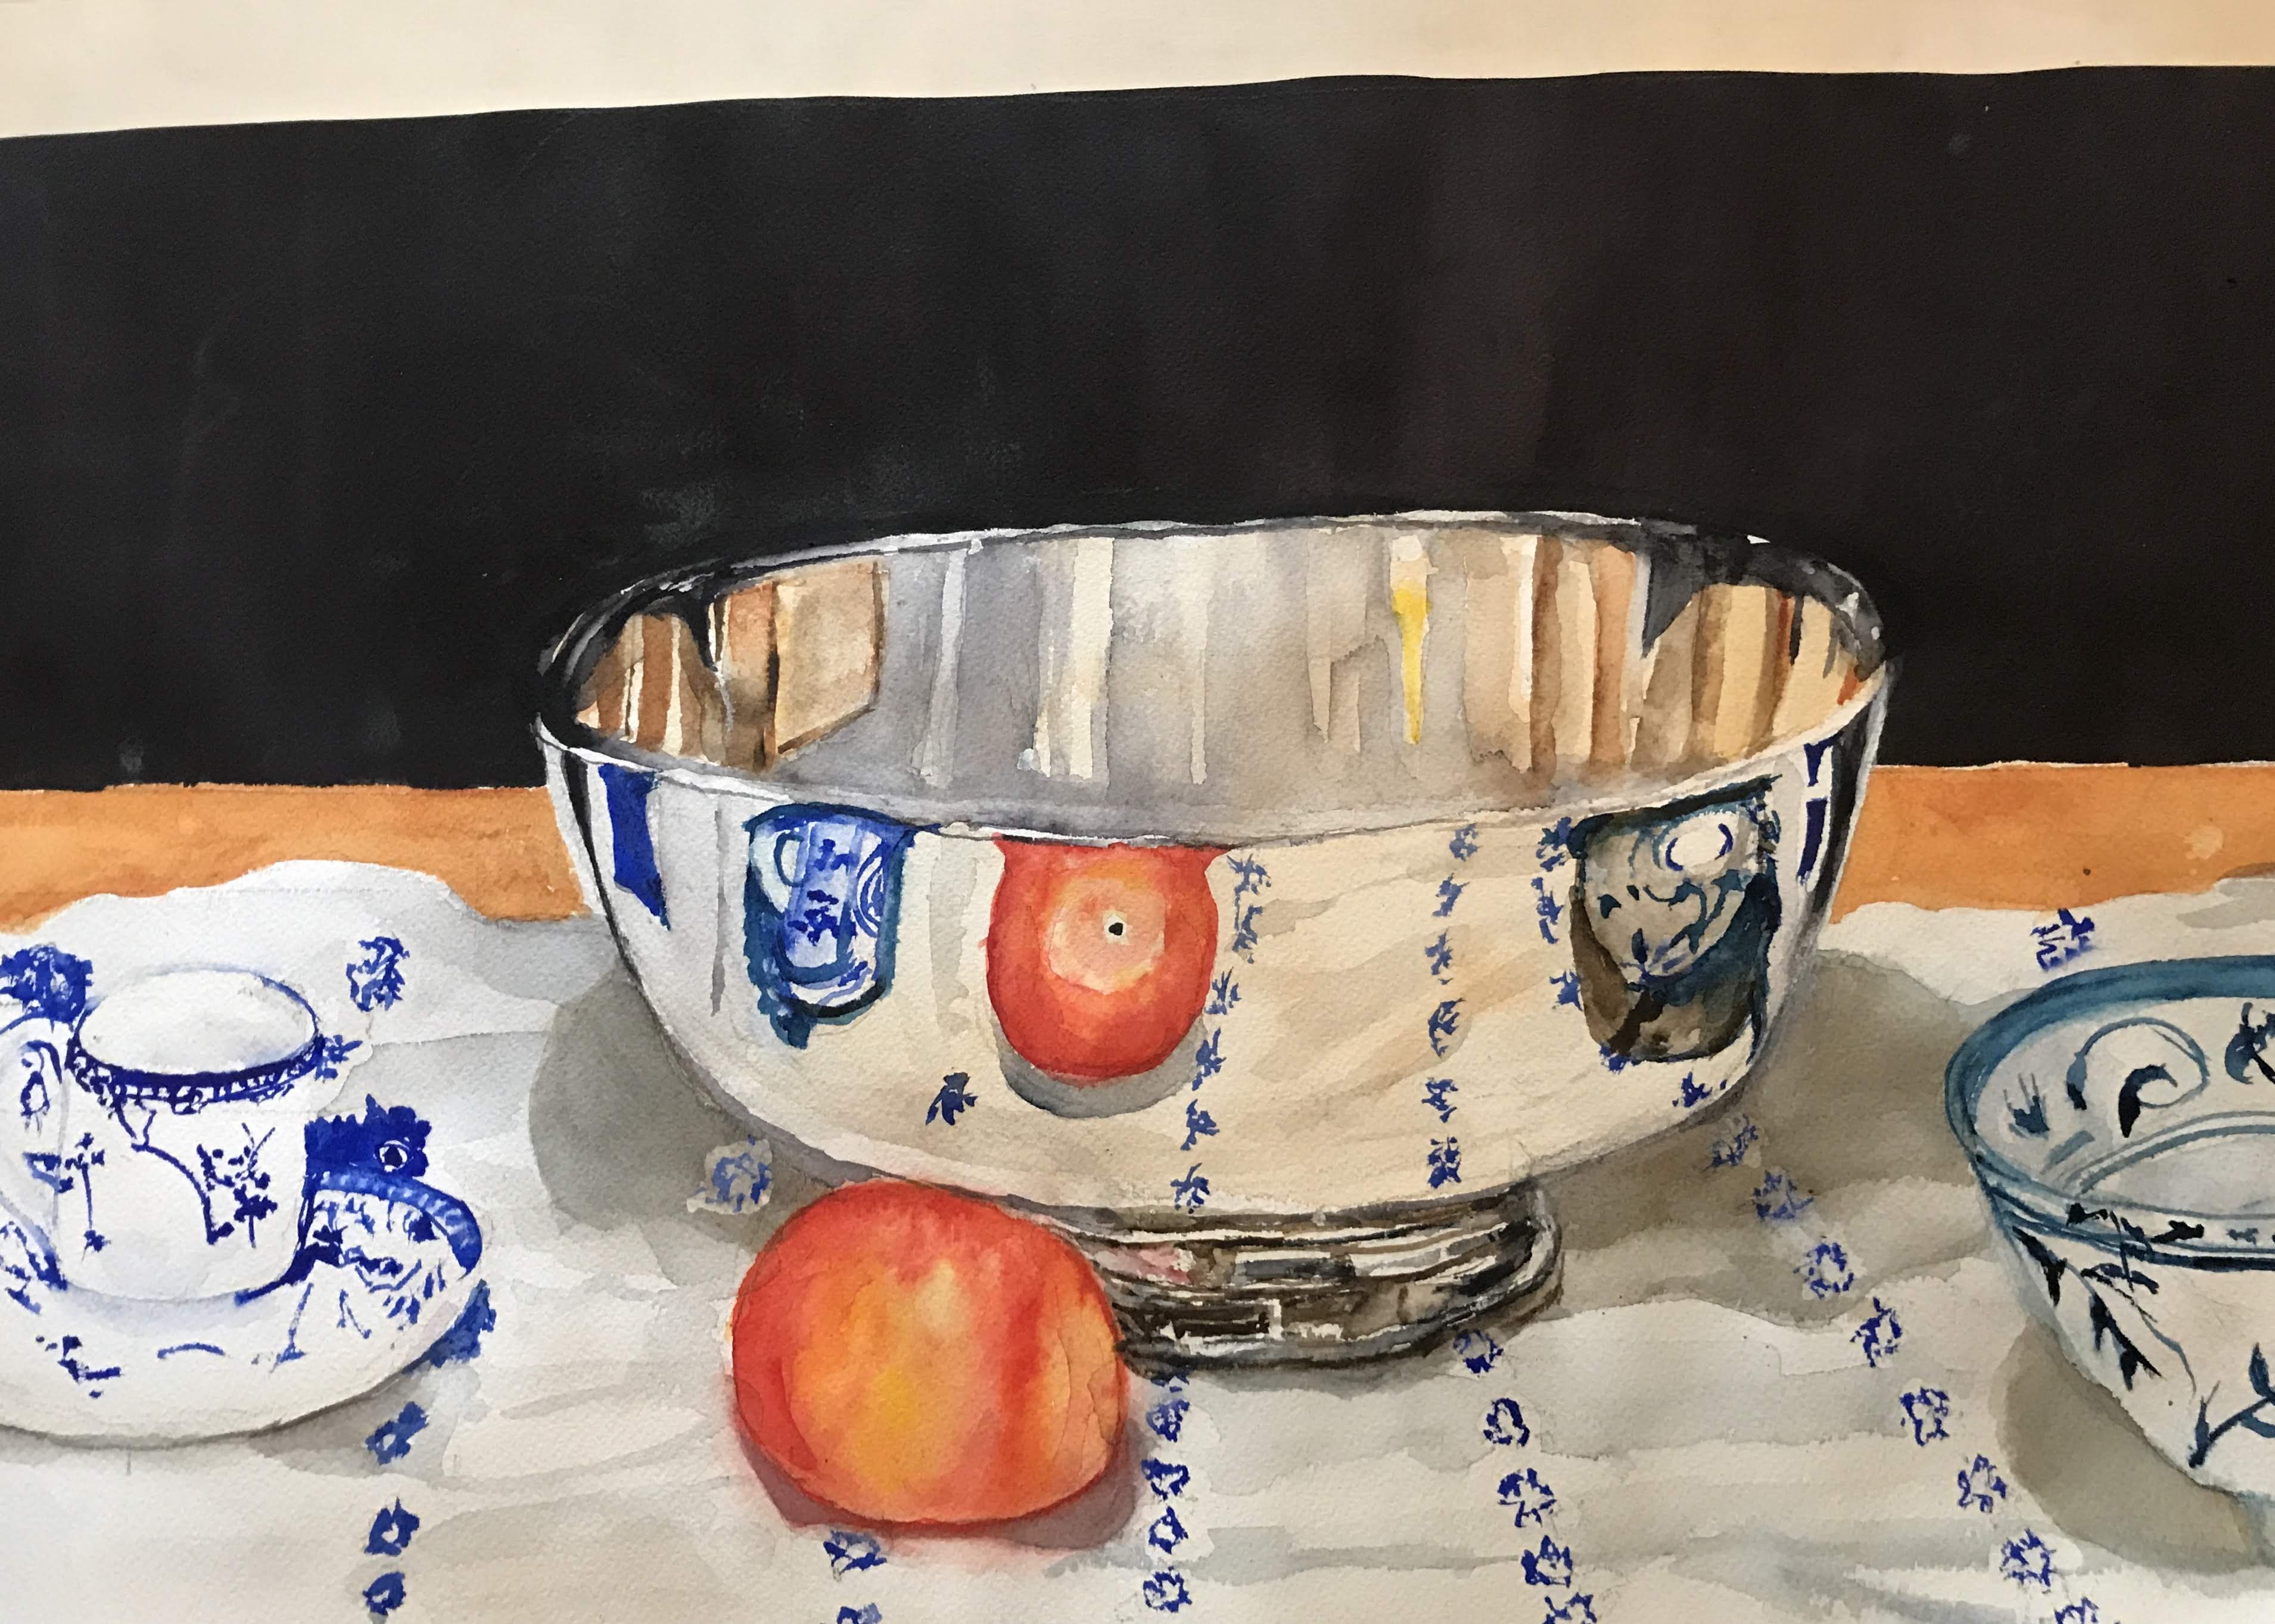 Oil painting of a silver bowl